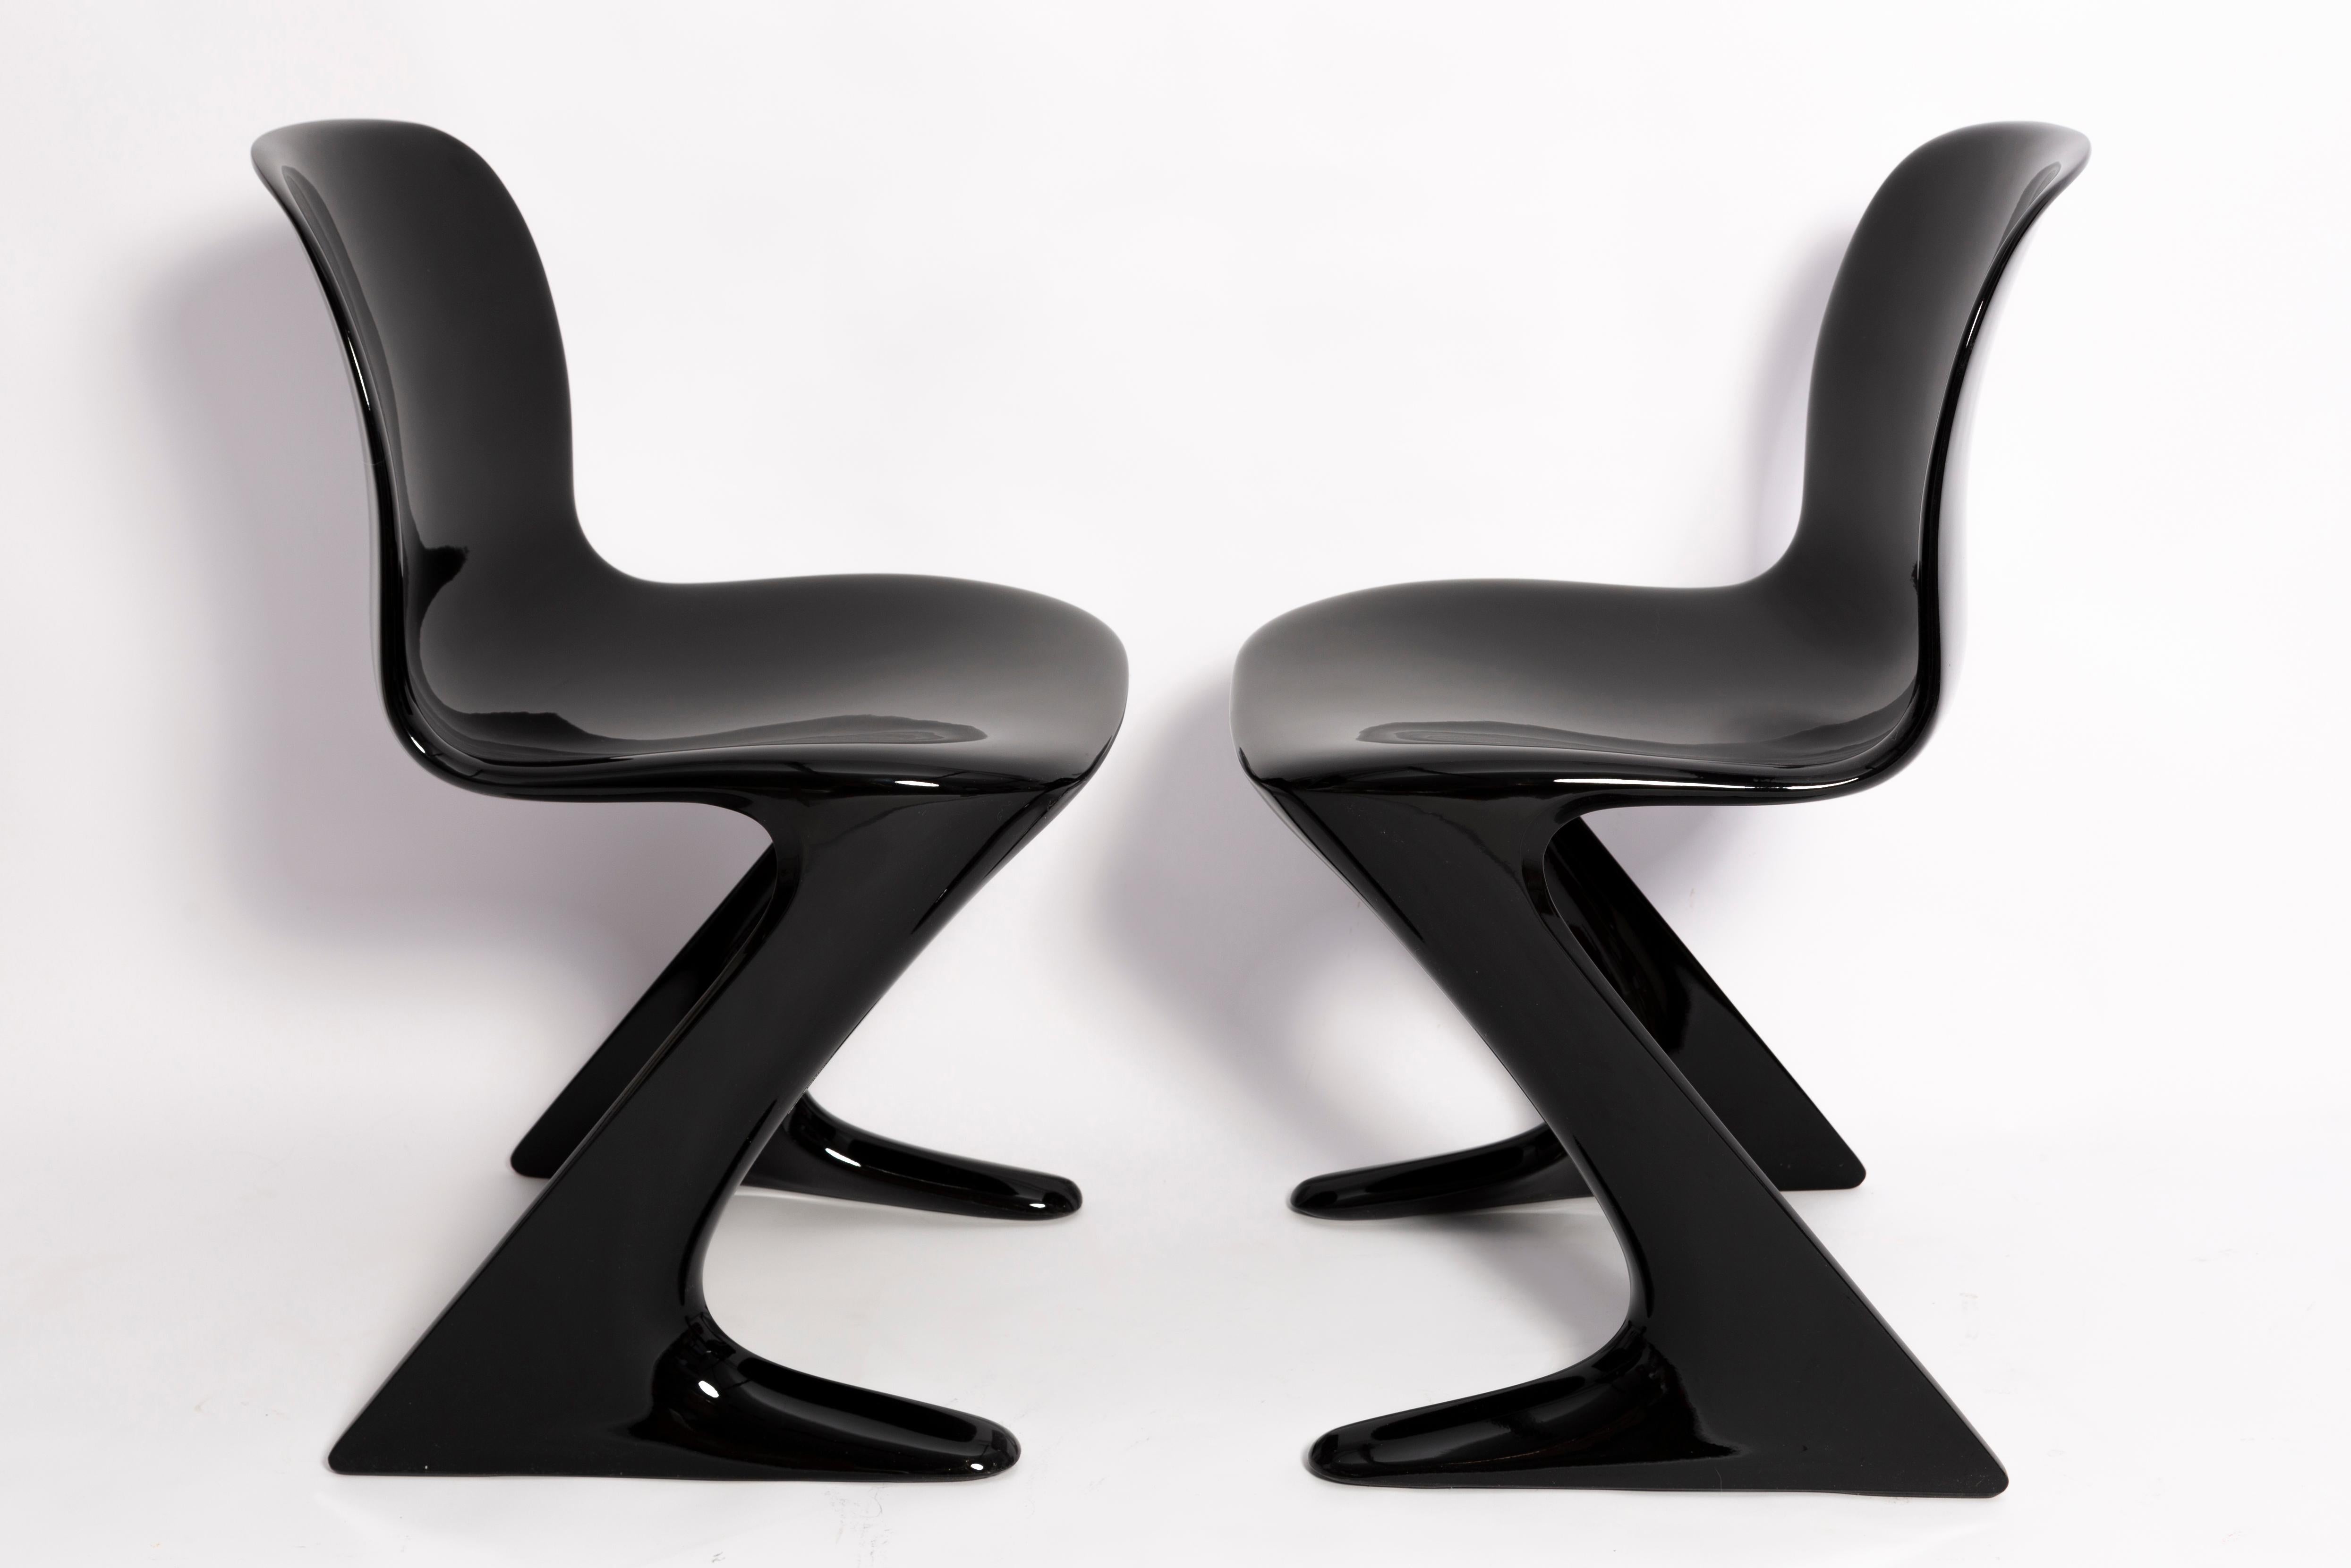 Two Mid-Century Black Kangaroo Chairs Designed by Ernst Moeckl, Germany, 1960s For Sale 4